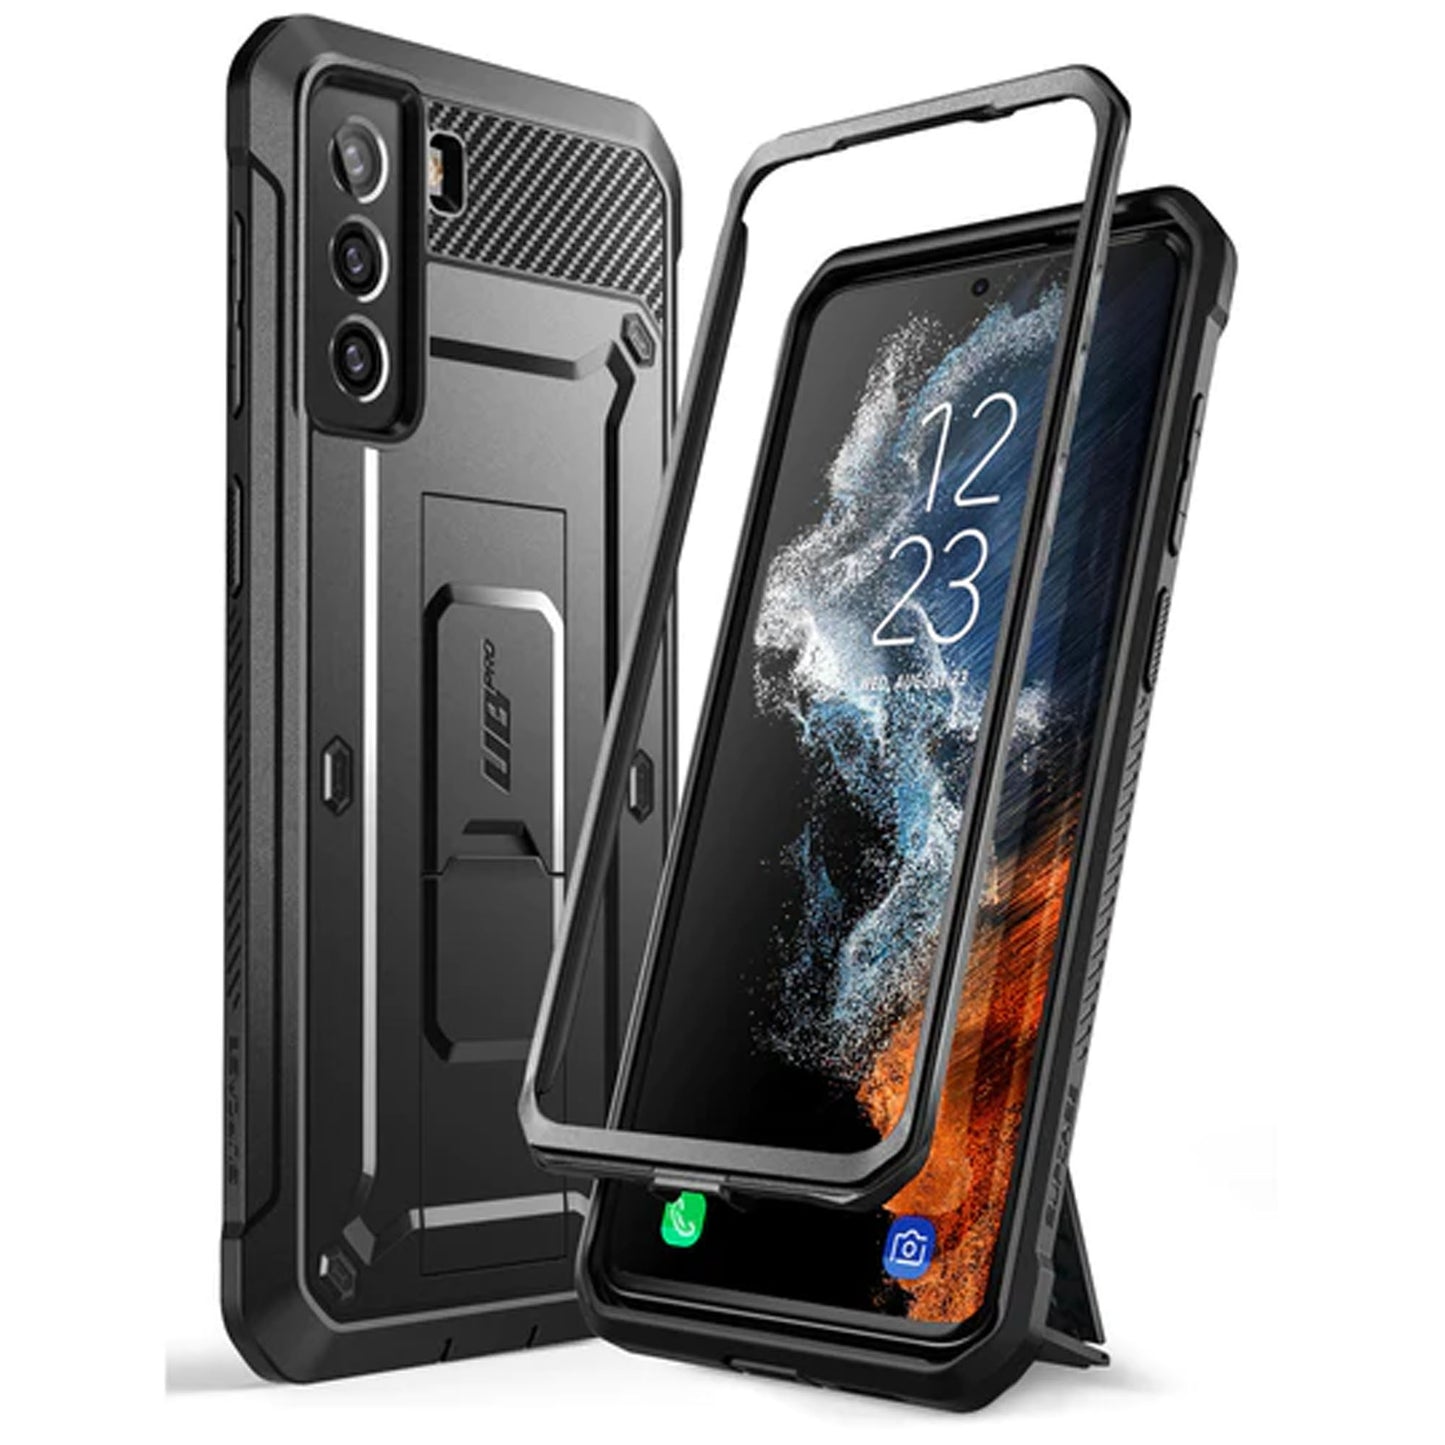 Supcase Unicorn Beetle Pro Rugged Case for Samsung Galaxy S22 - Black (Barcode: 843439116061 )